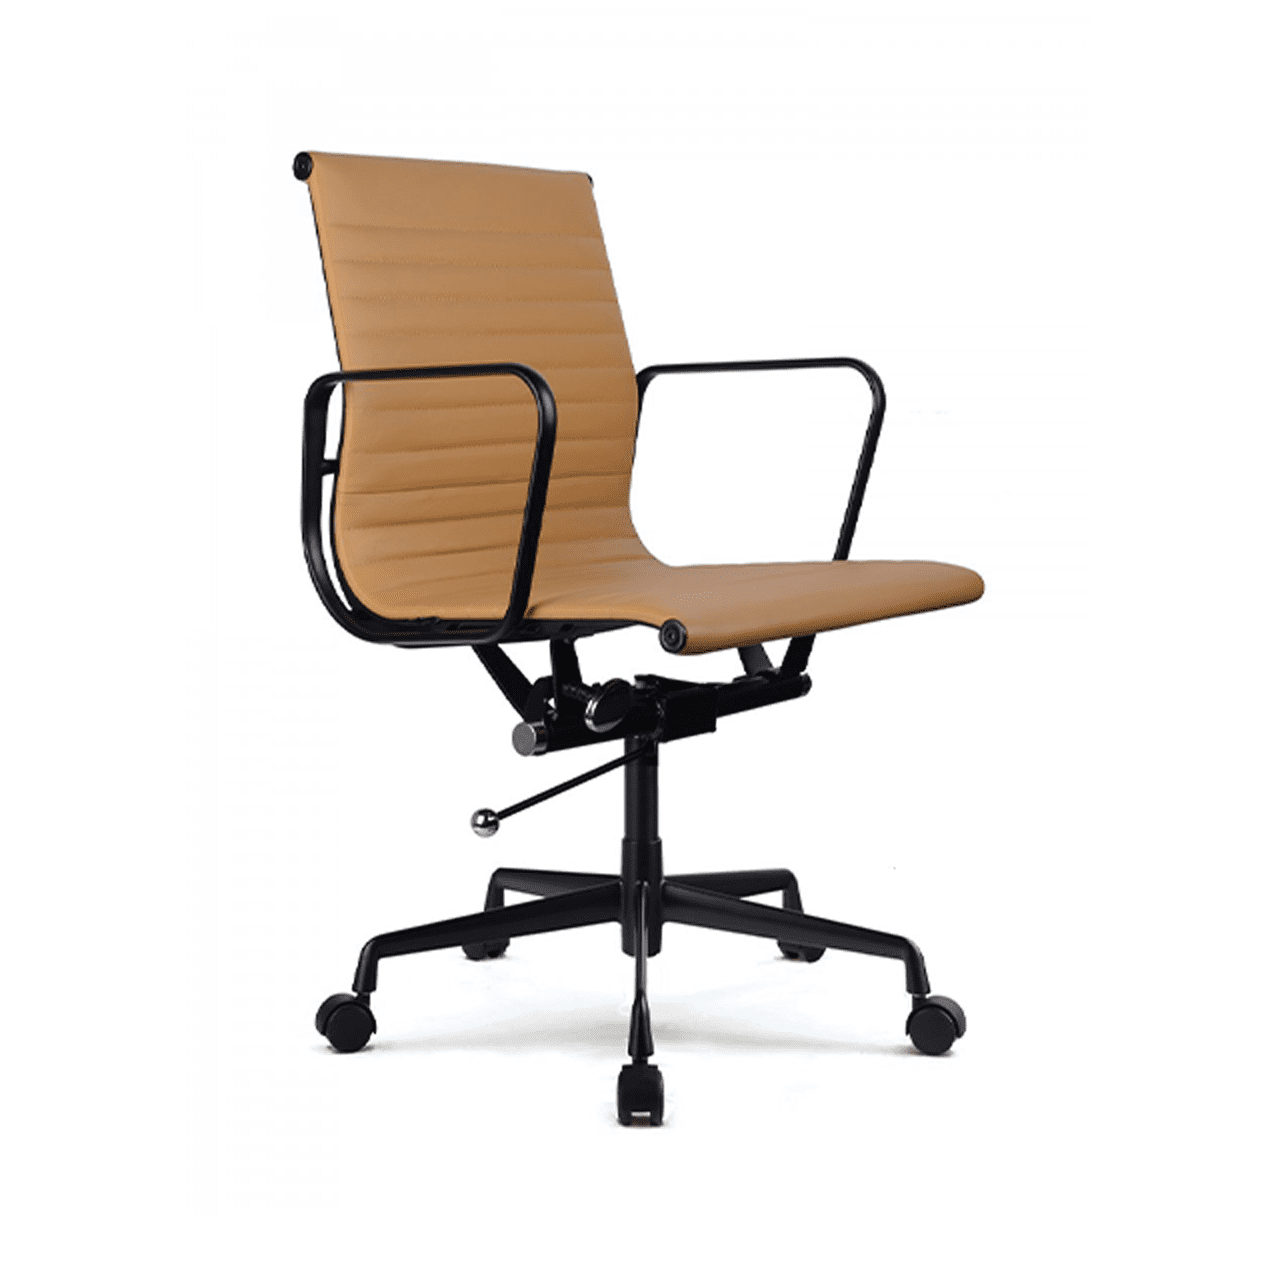 VYVE Leather Chair | Stylish Ergonomic Chair | The Home Office